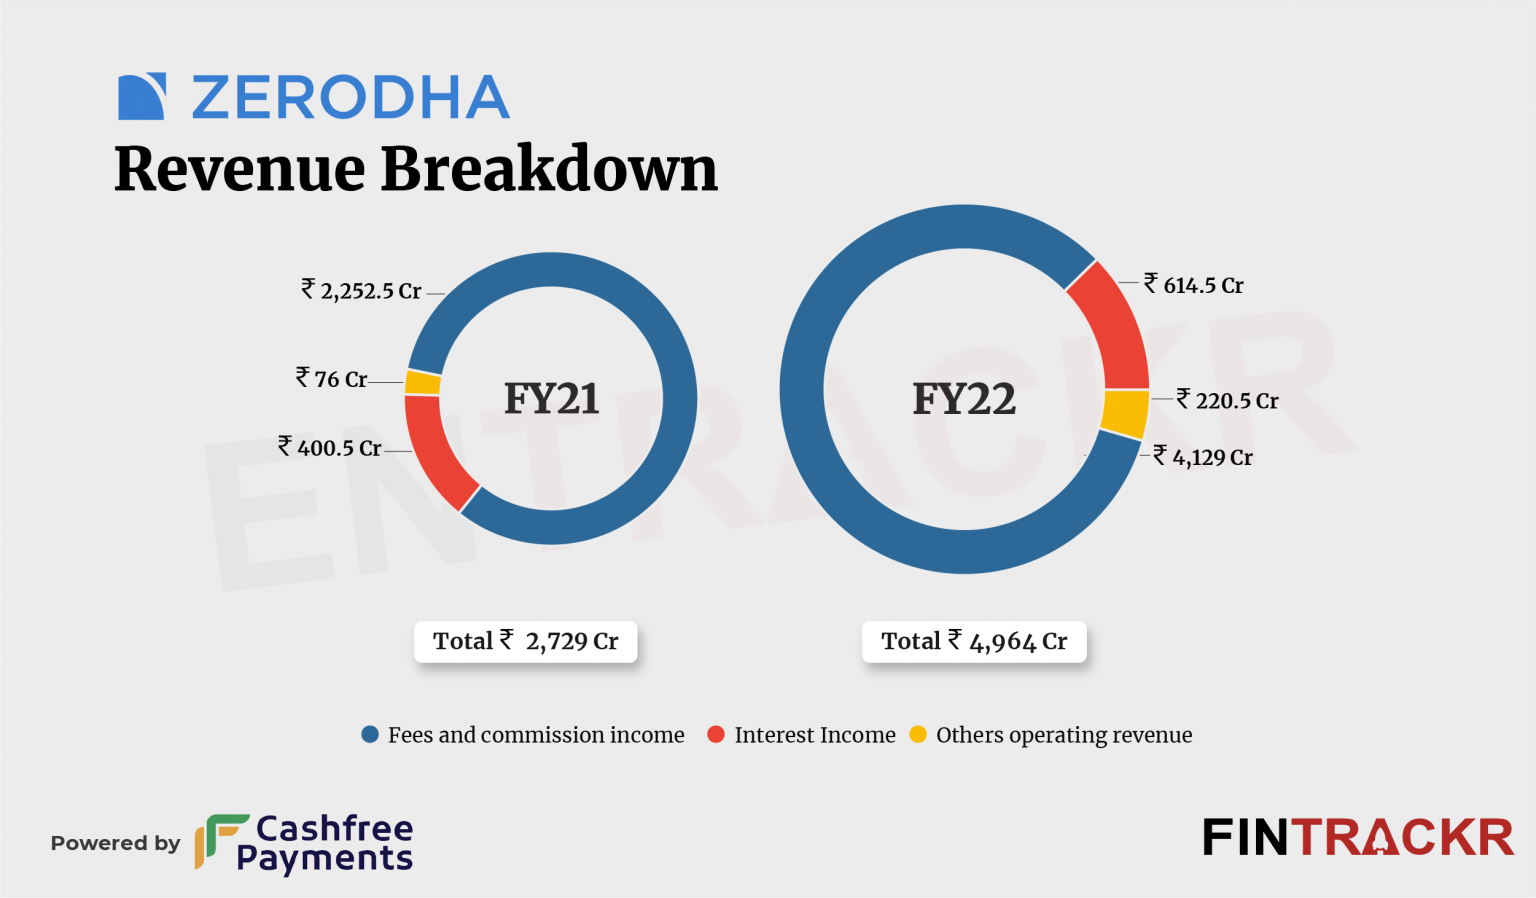 Zerodha posts Rs 4,964 Cr revenue and Rs 2,094 Cr profit in FY22